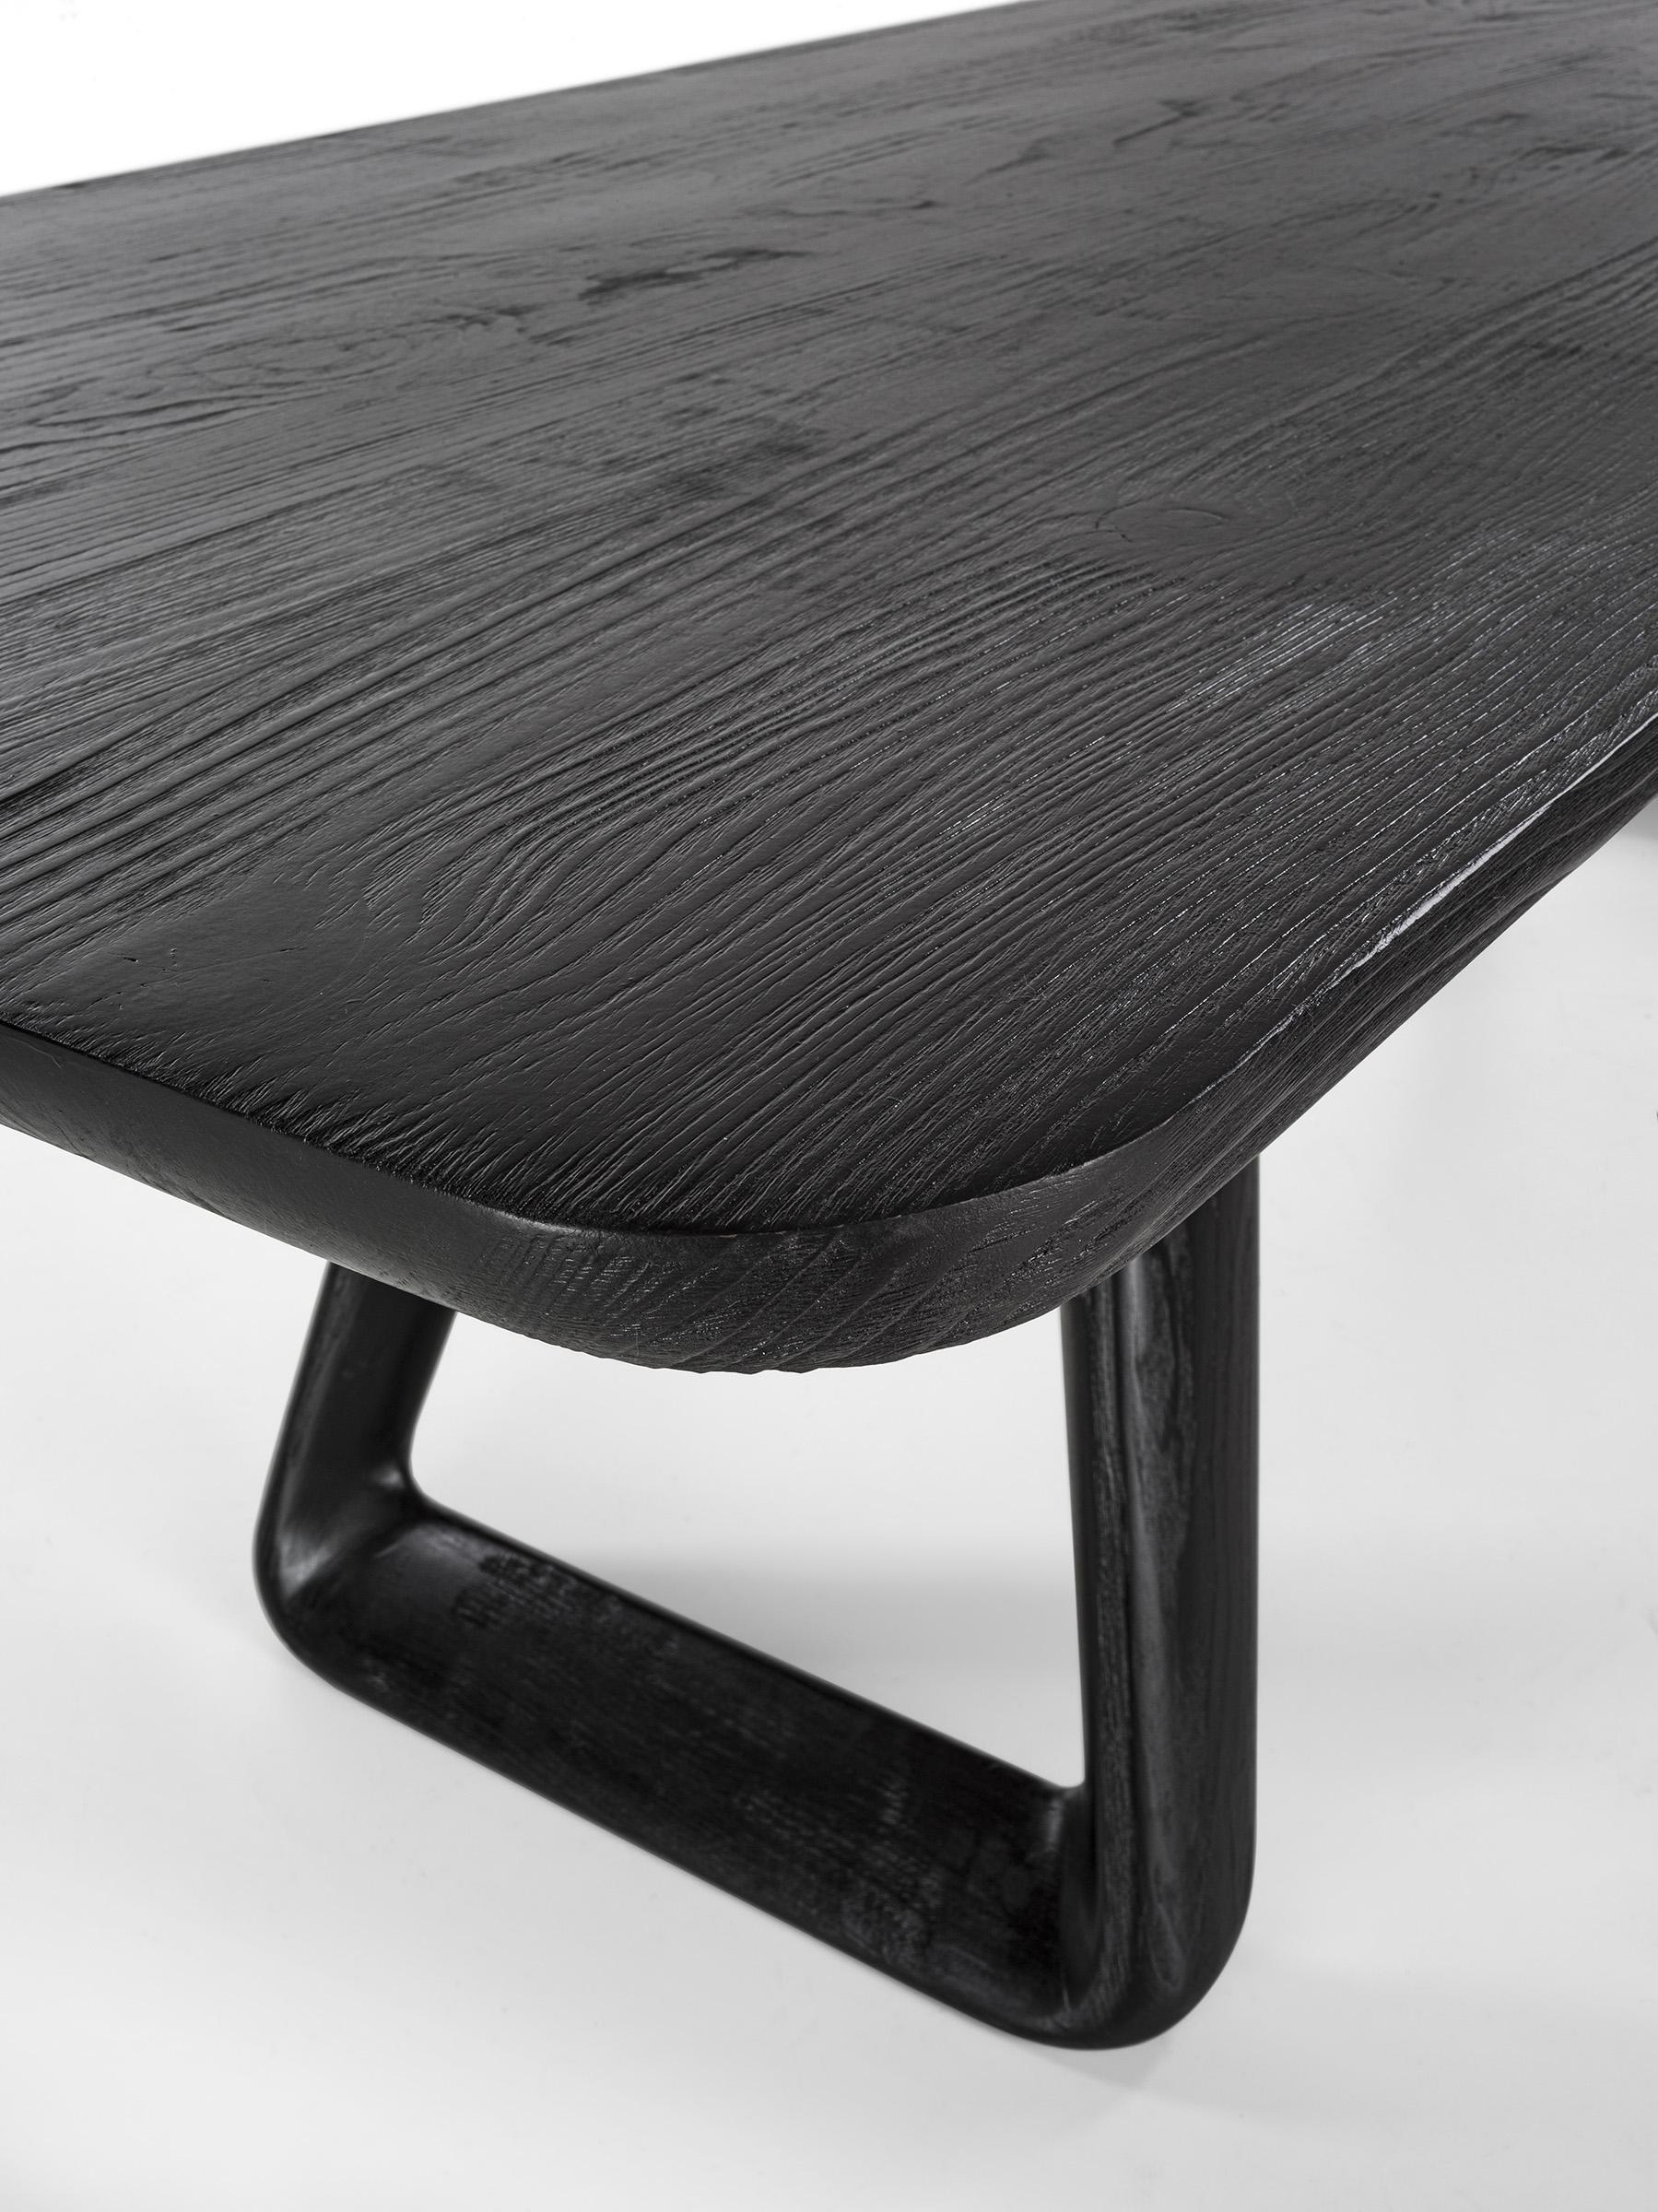 Contemporary Sospiro Wood Dining Table, Designed by Claudio Bellini, Made in Italy For Sale